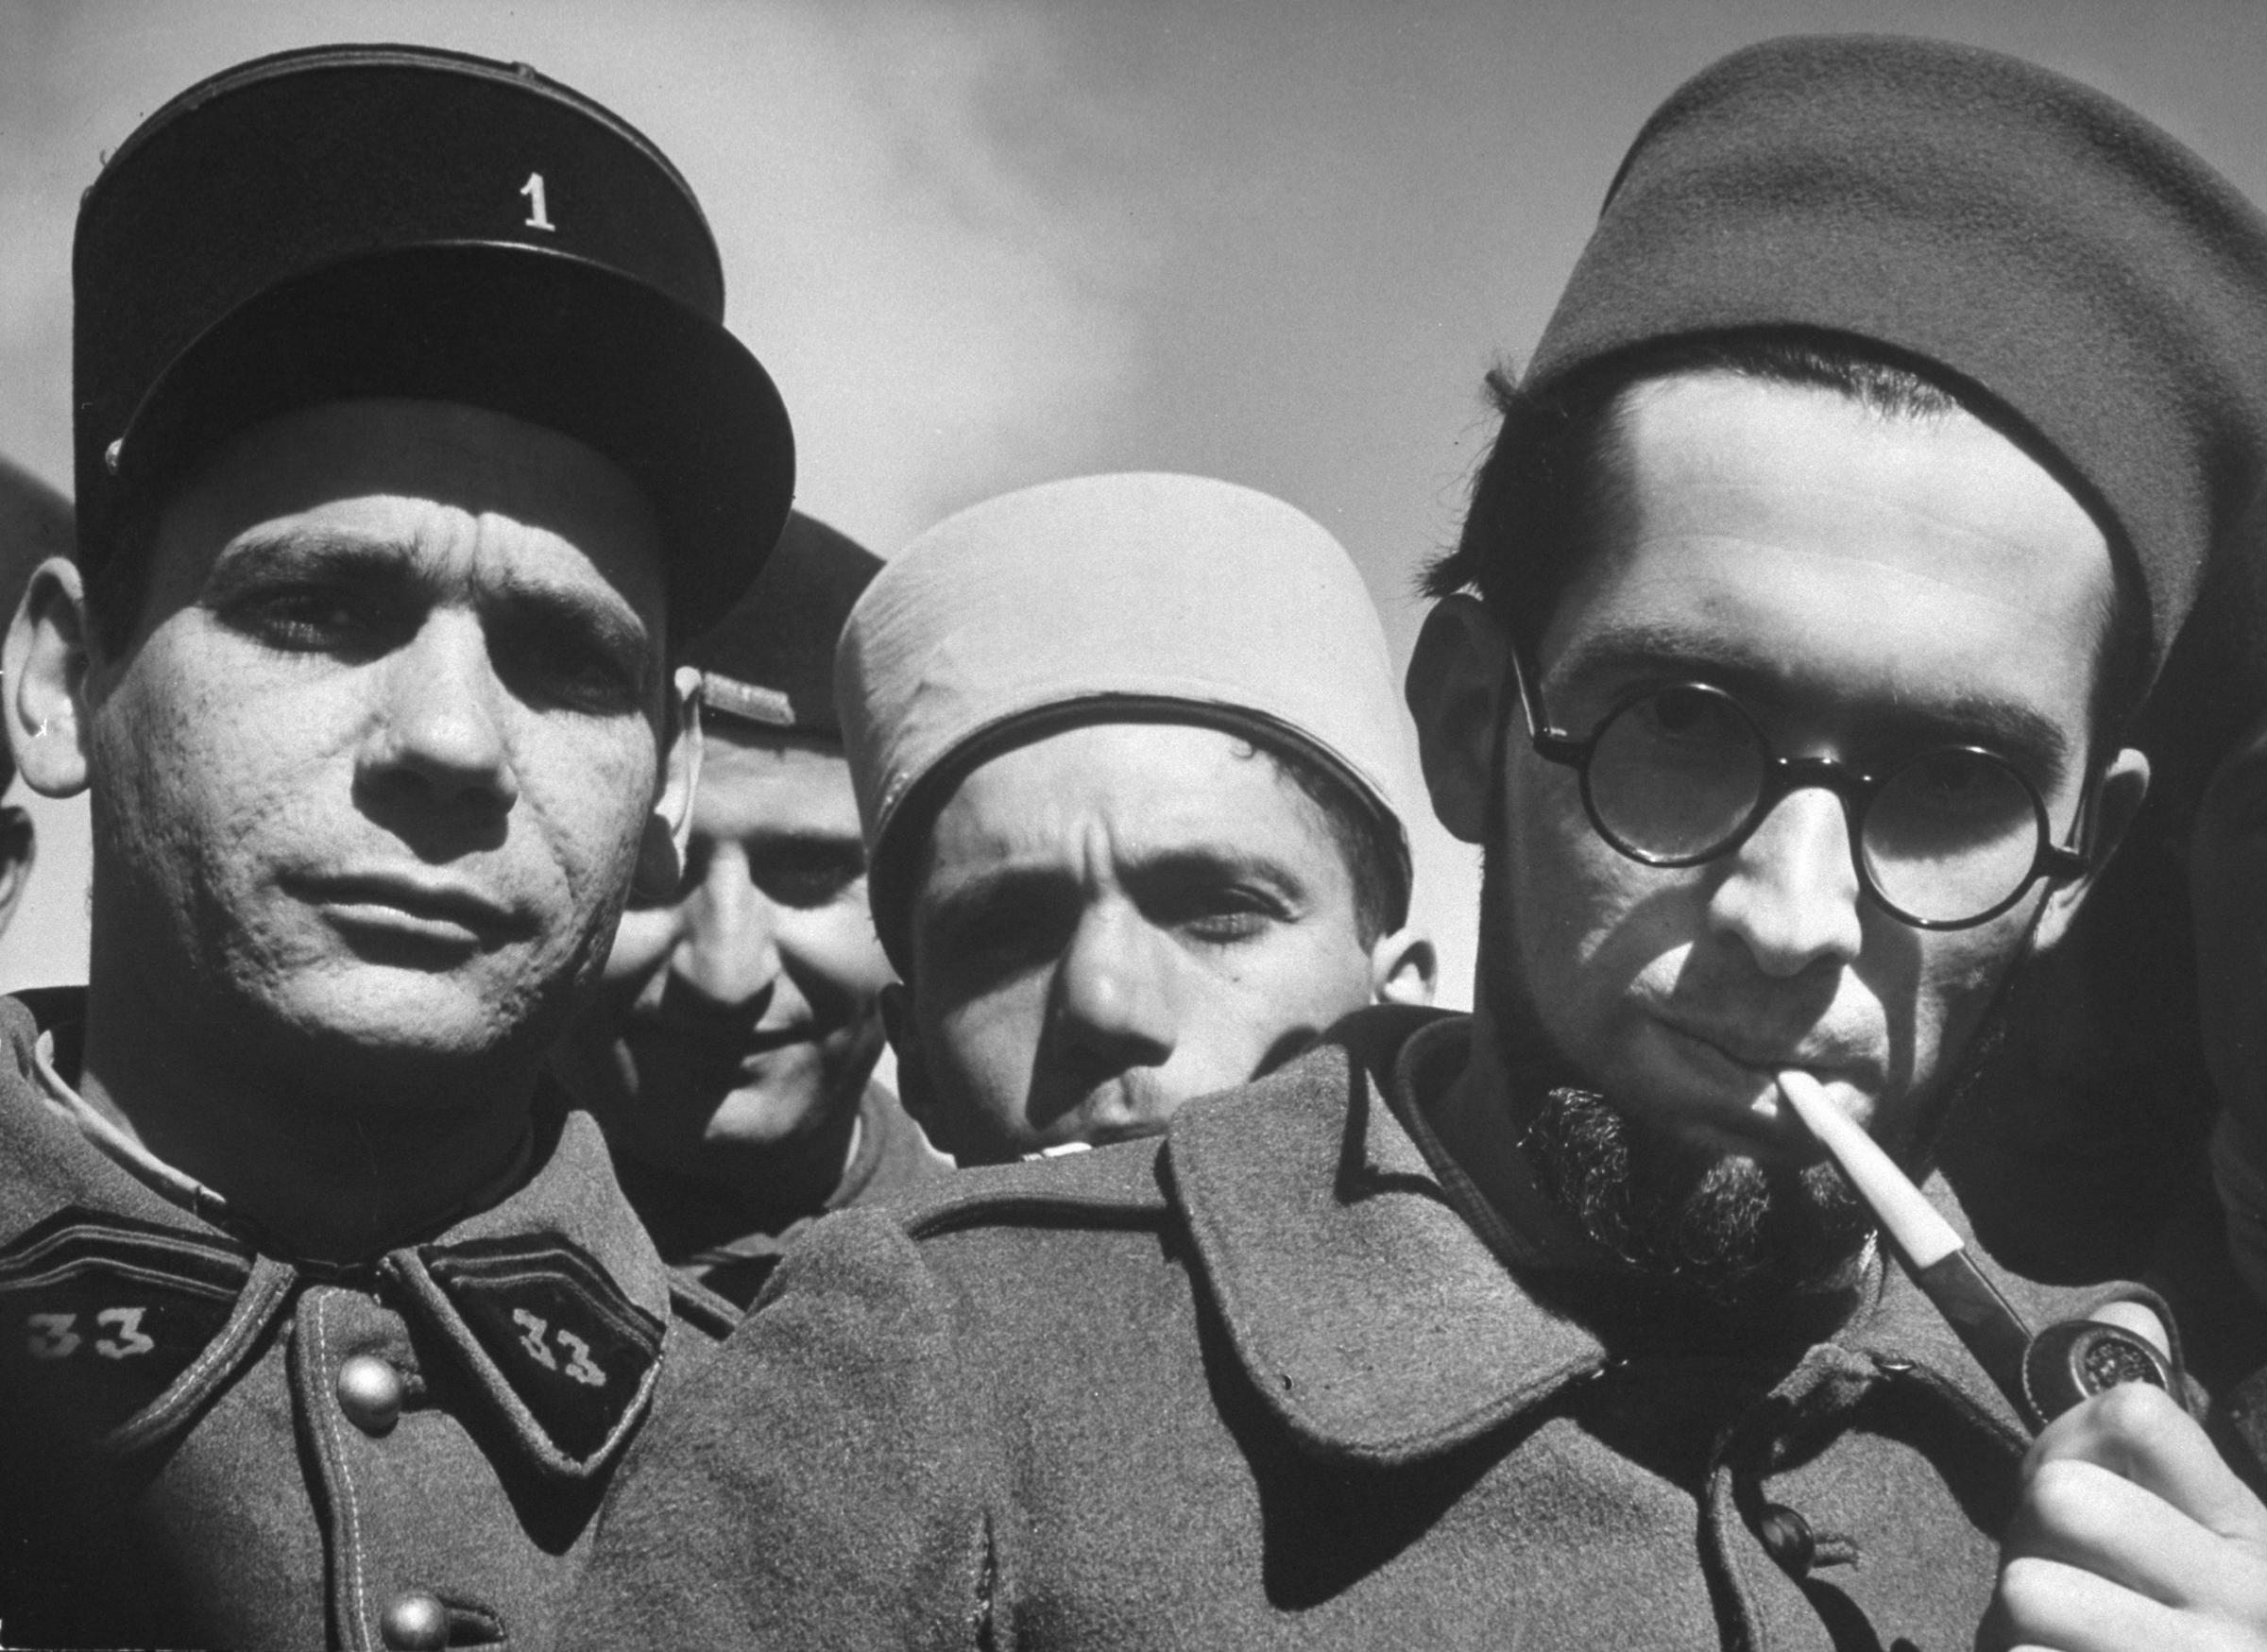 French Foreign Legion soldiers at their outpost at Homs, Syria, 1940.